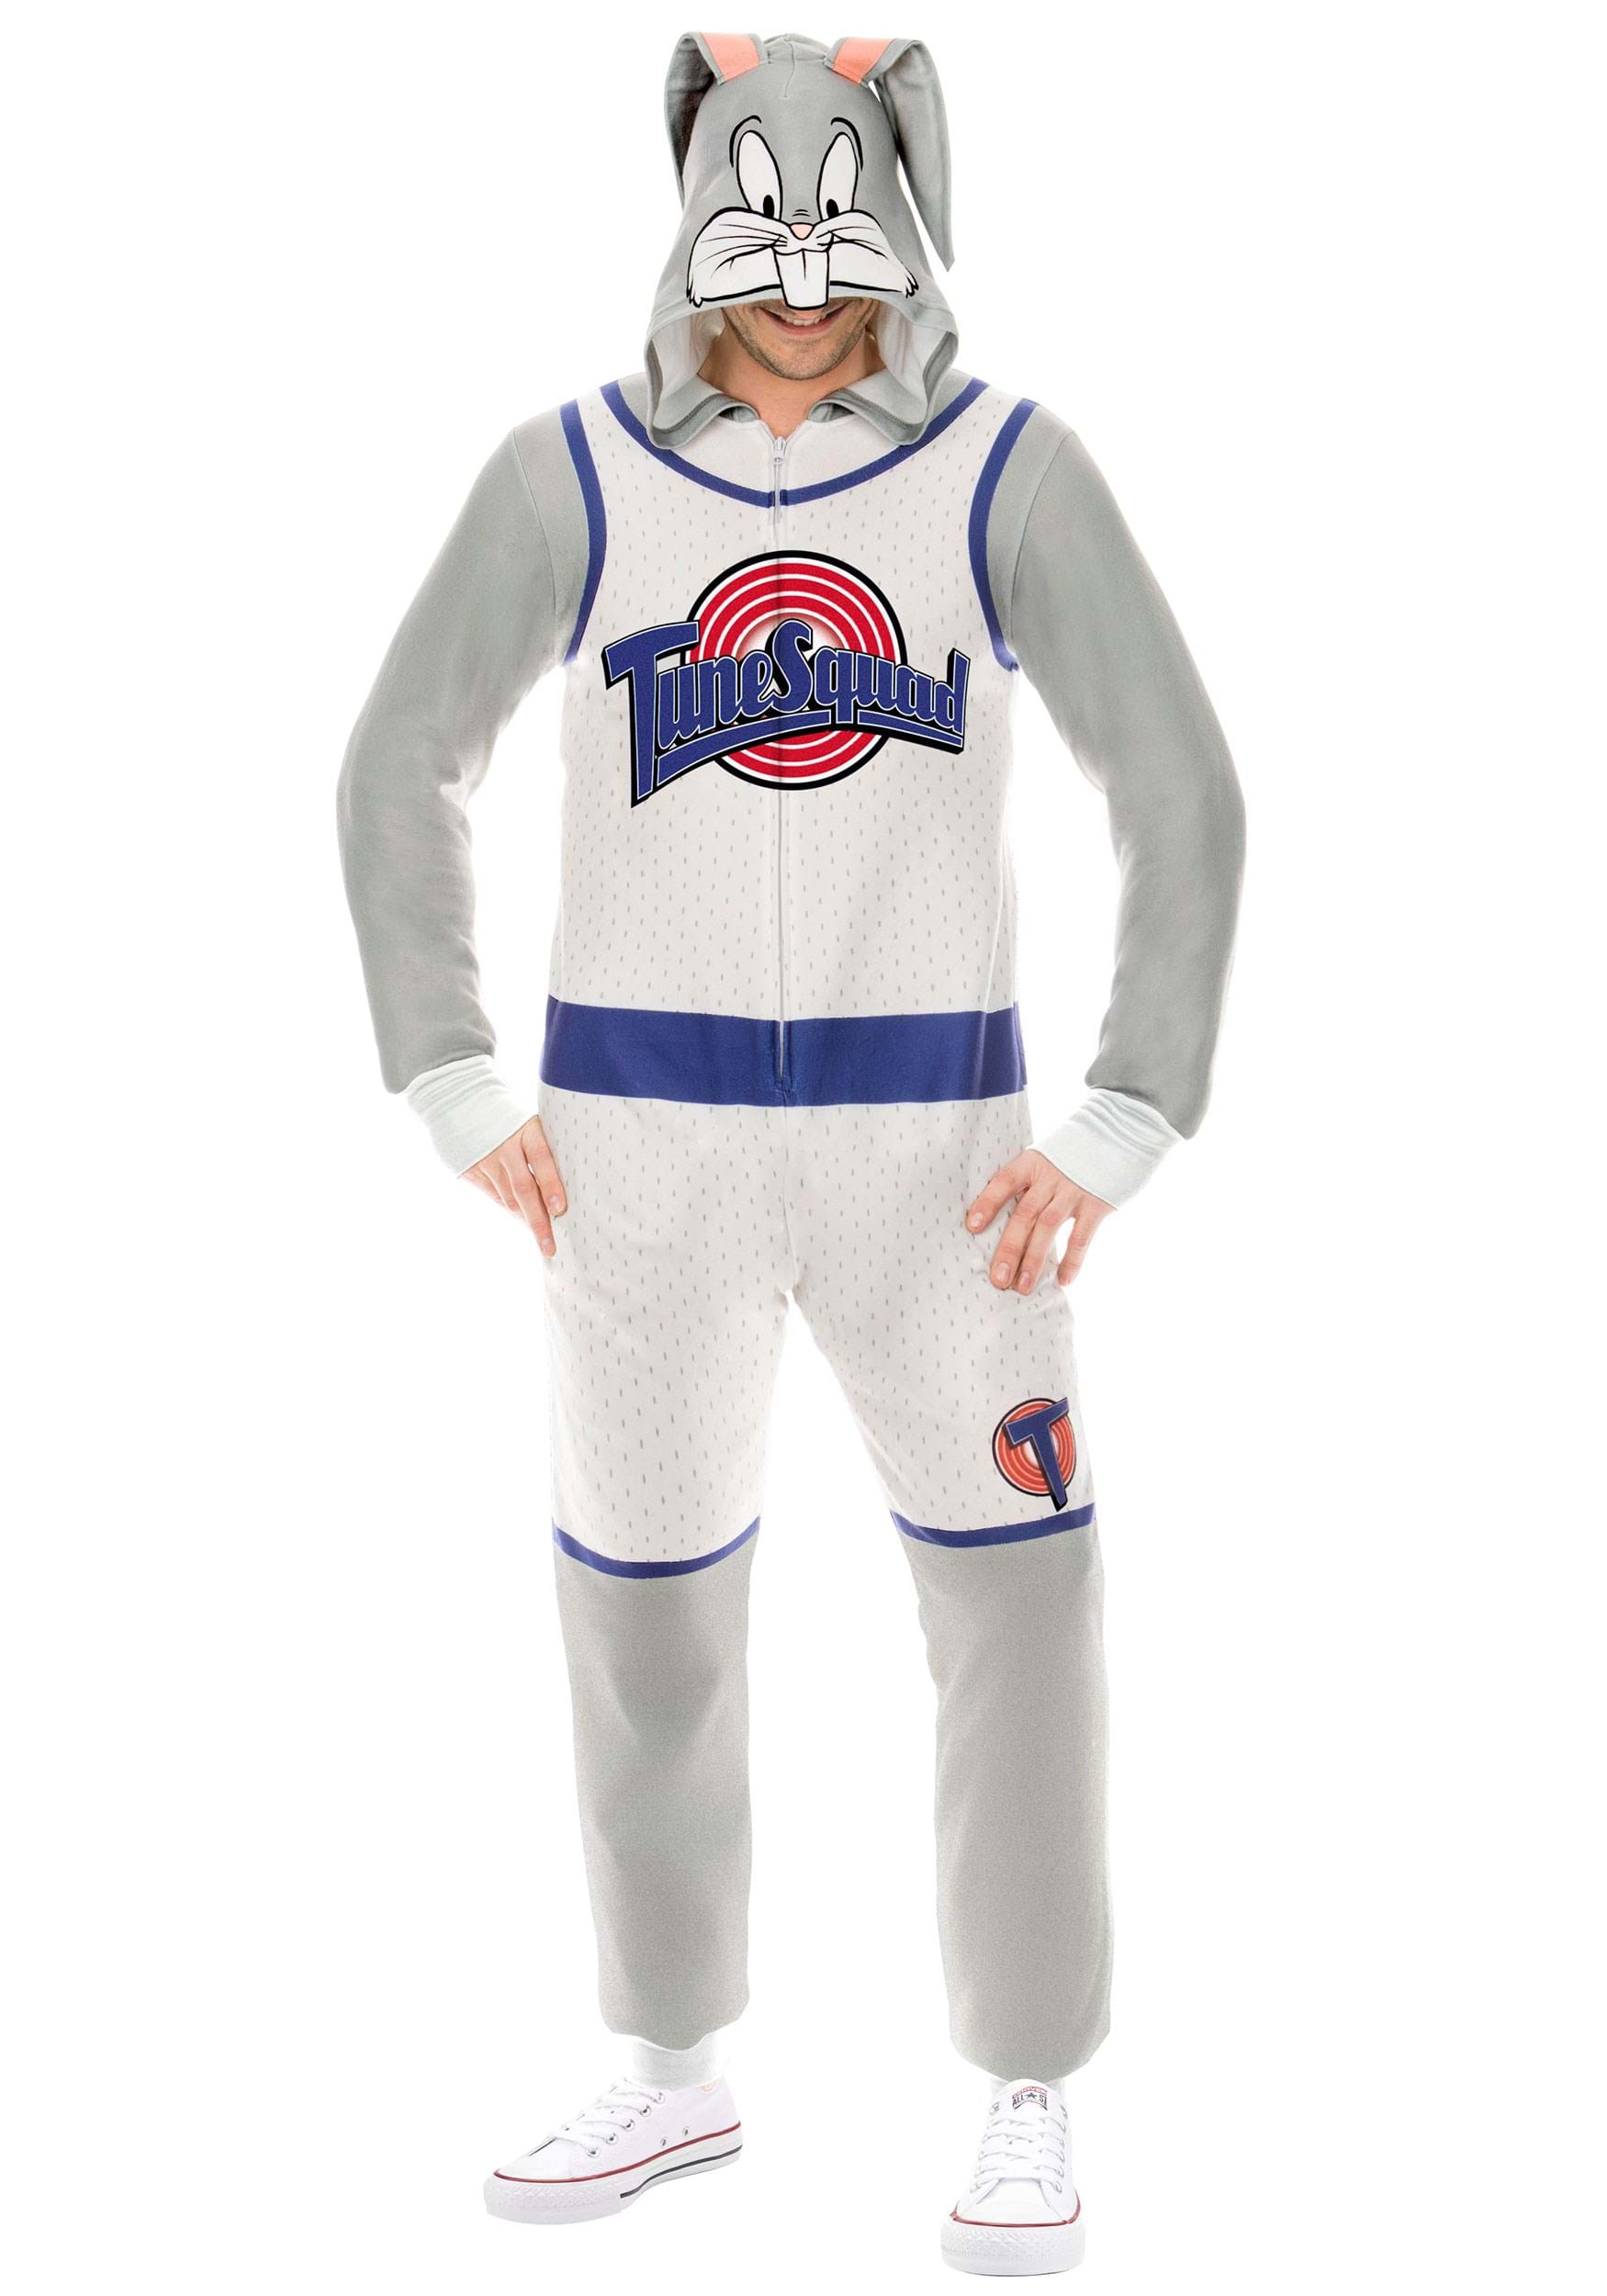 Space Jam Bugs Bunny Union Suit for Adults